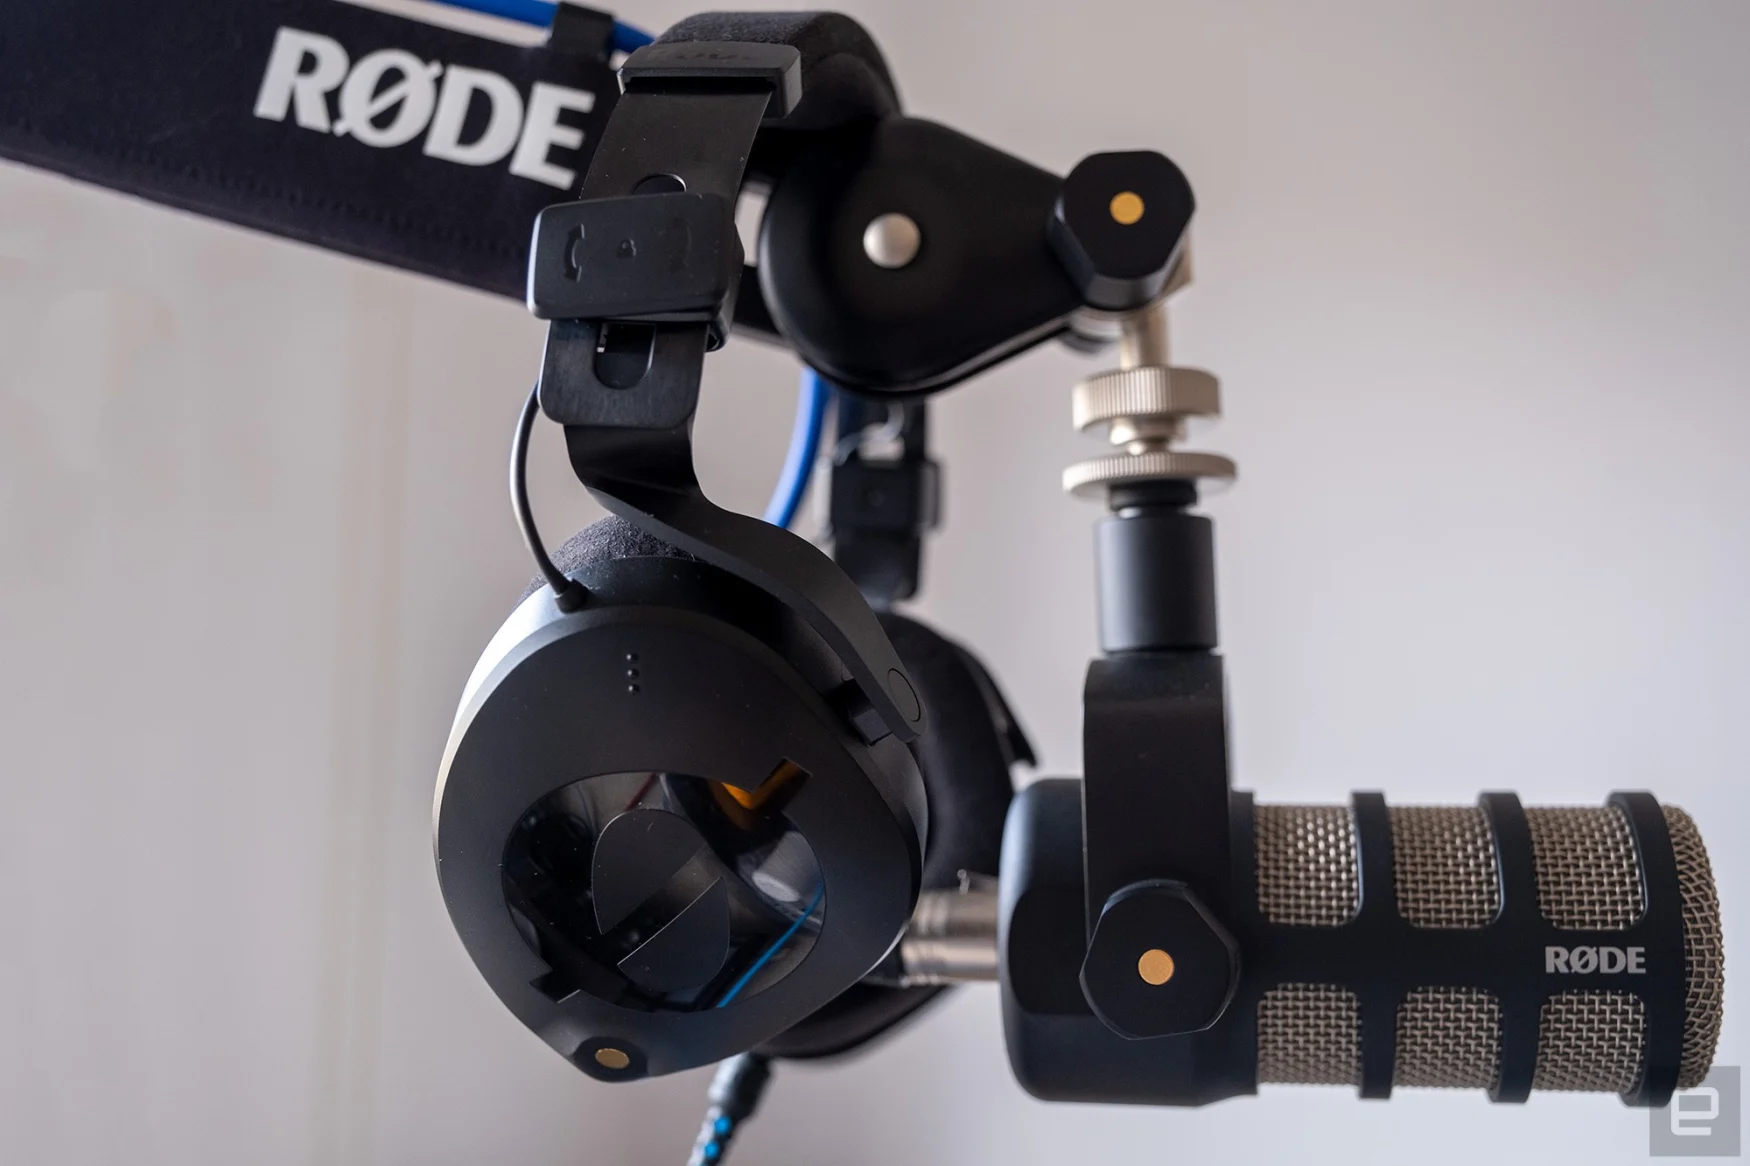 Rode's NTH-100 headphones are pictured alongside a Rode podcasting microphone.